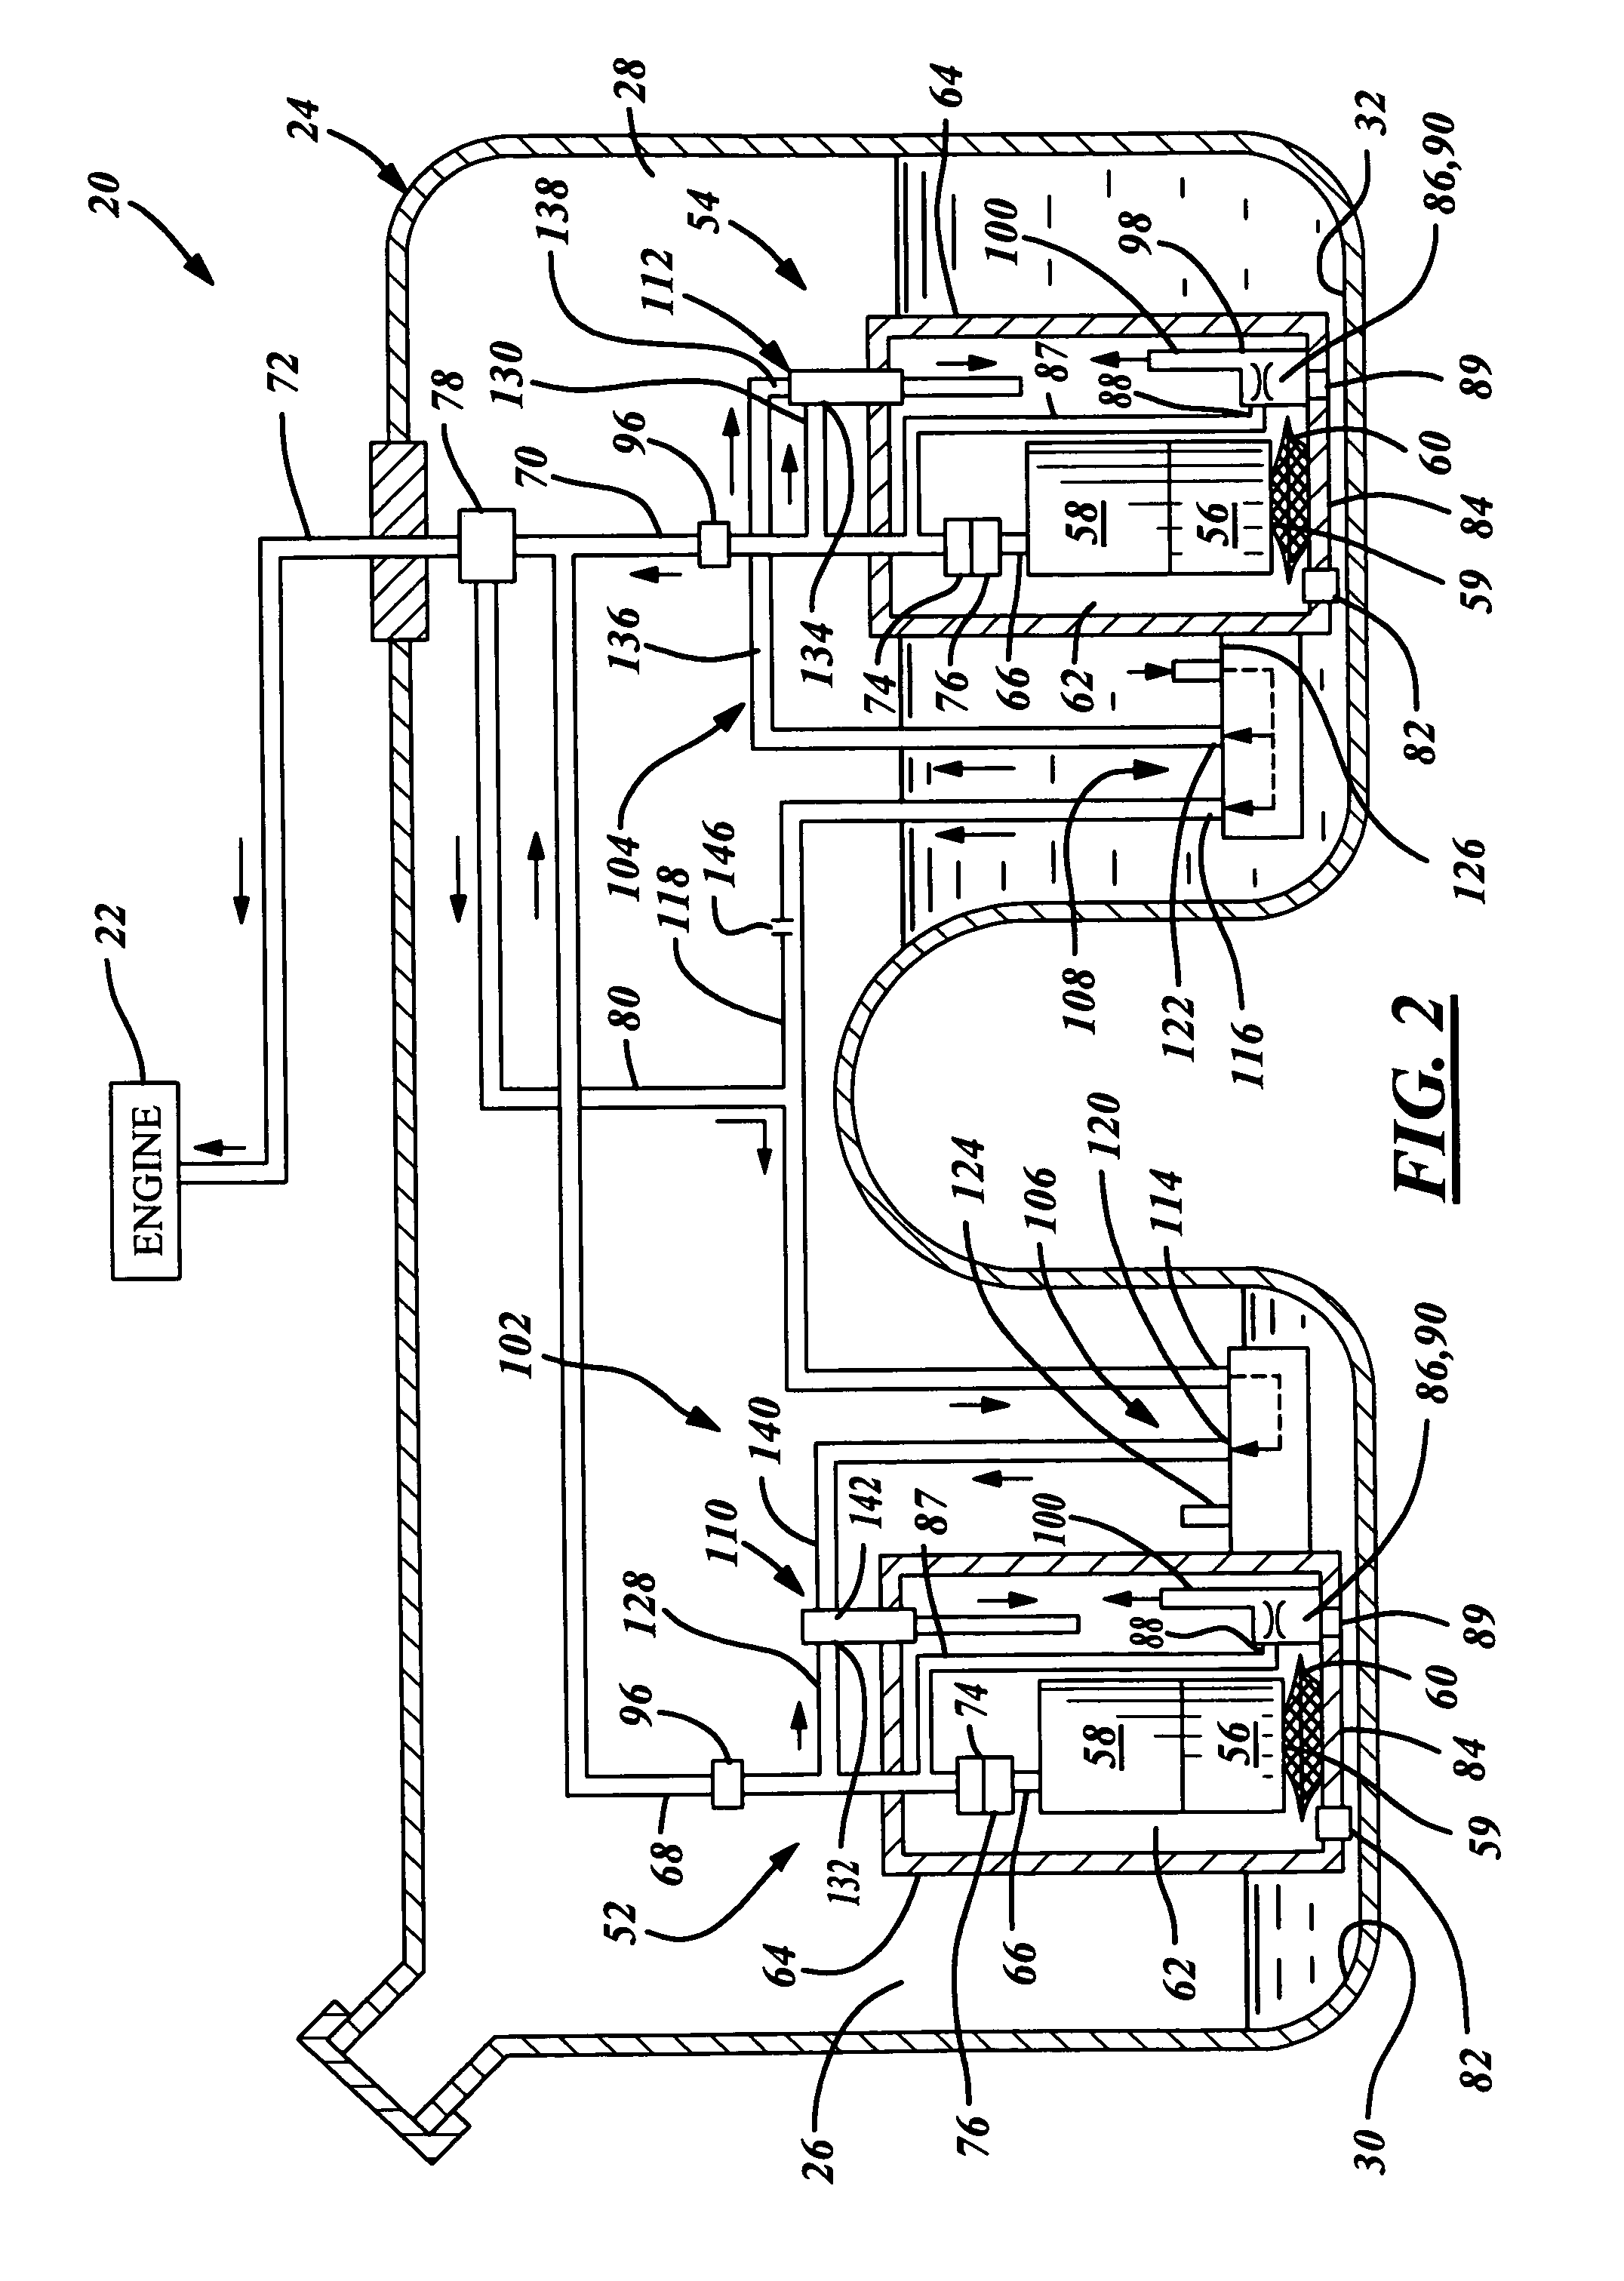 Fuel delivery system for a combustion engine